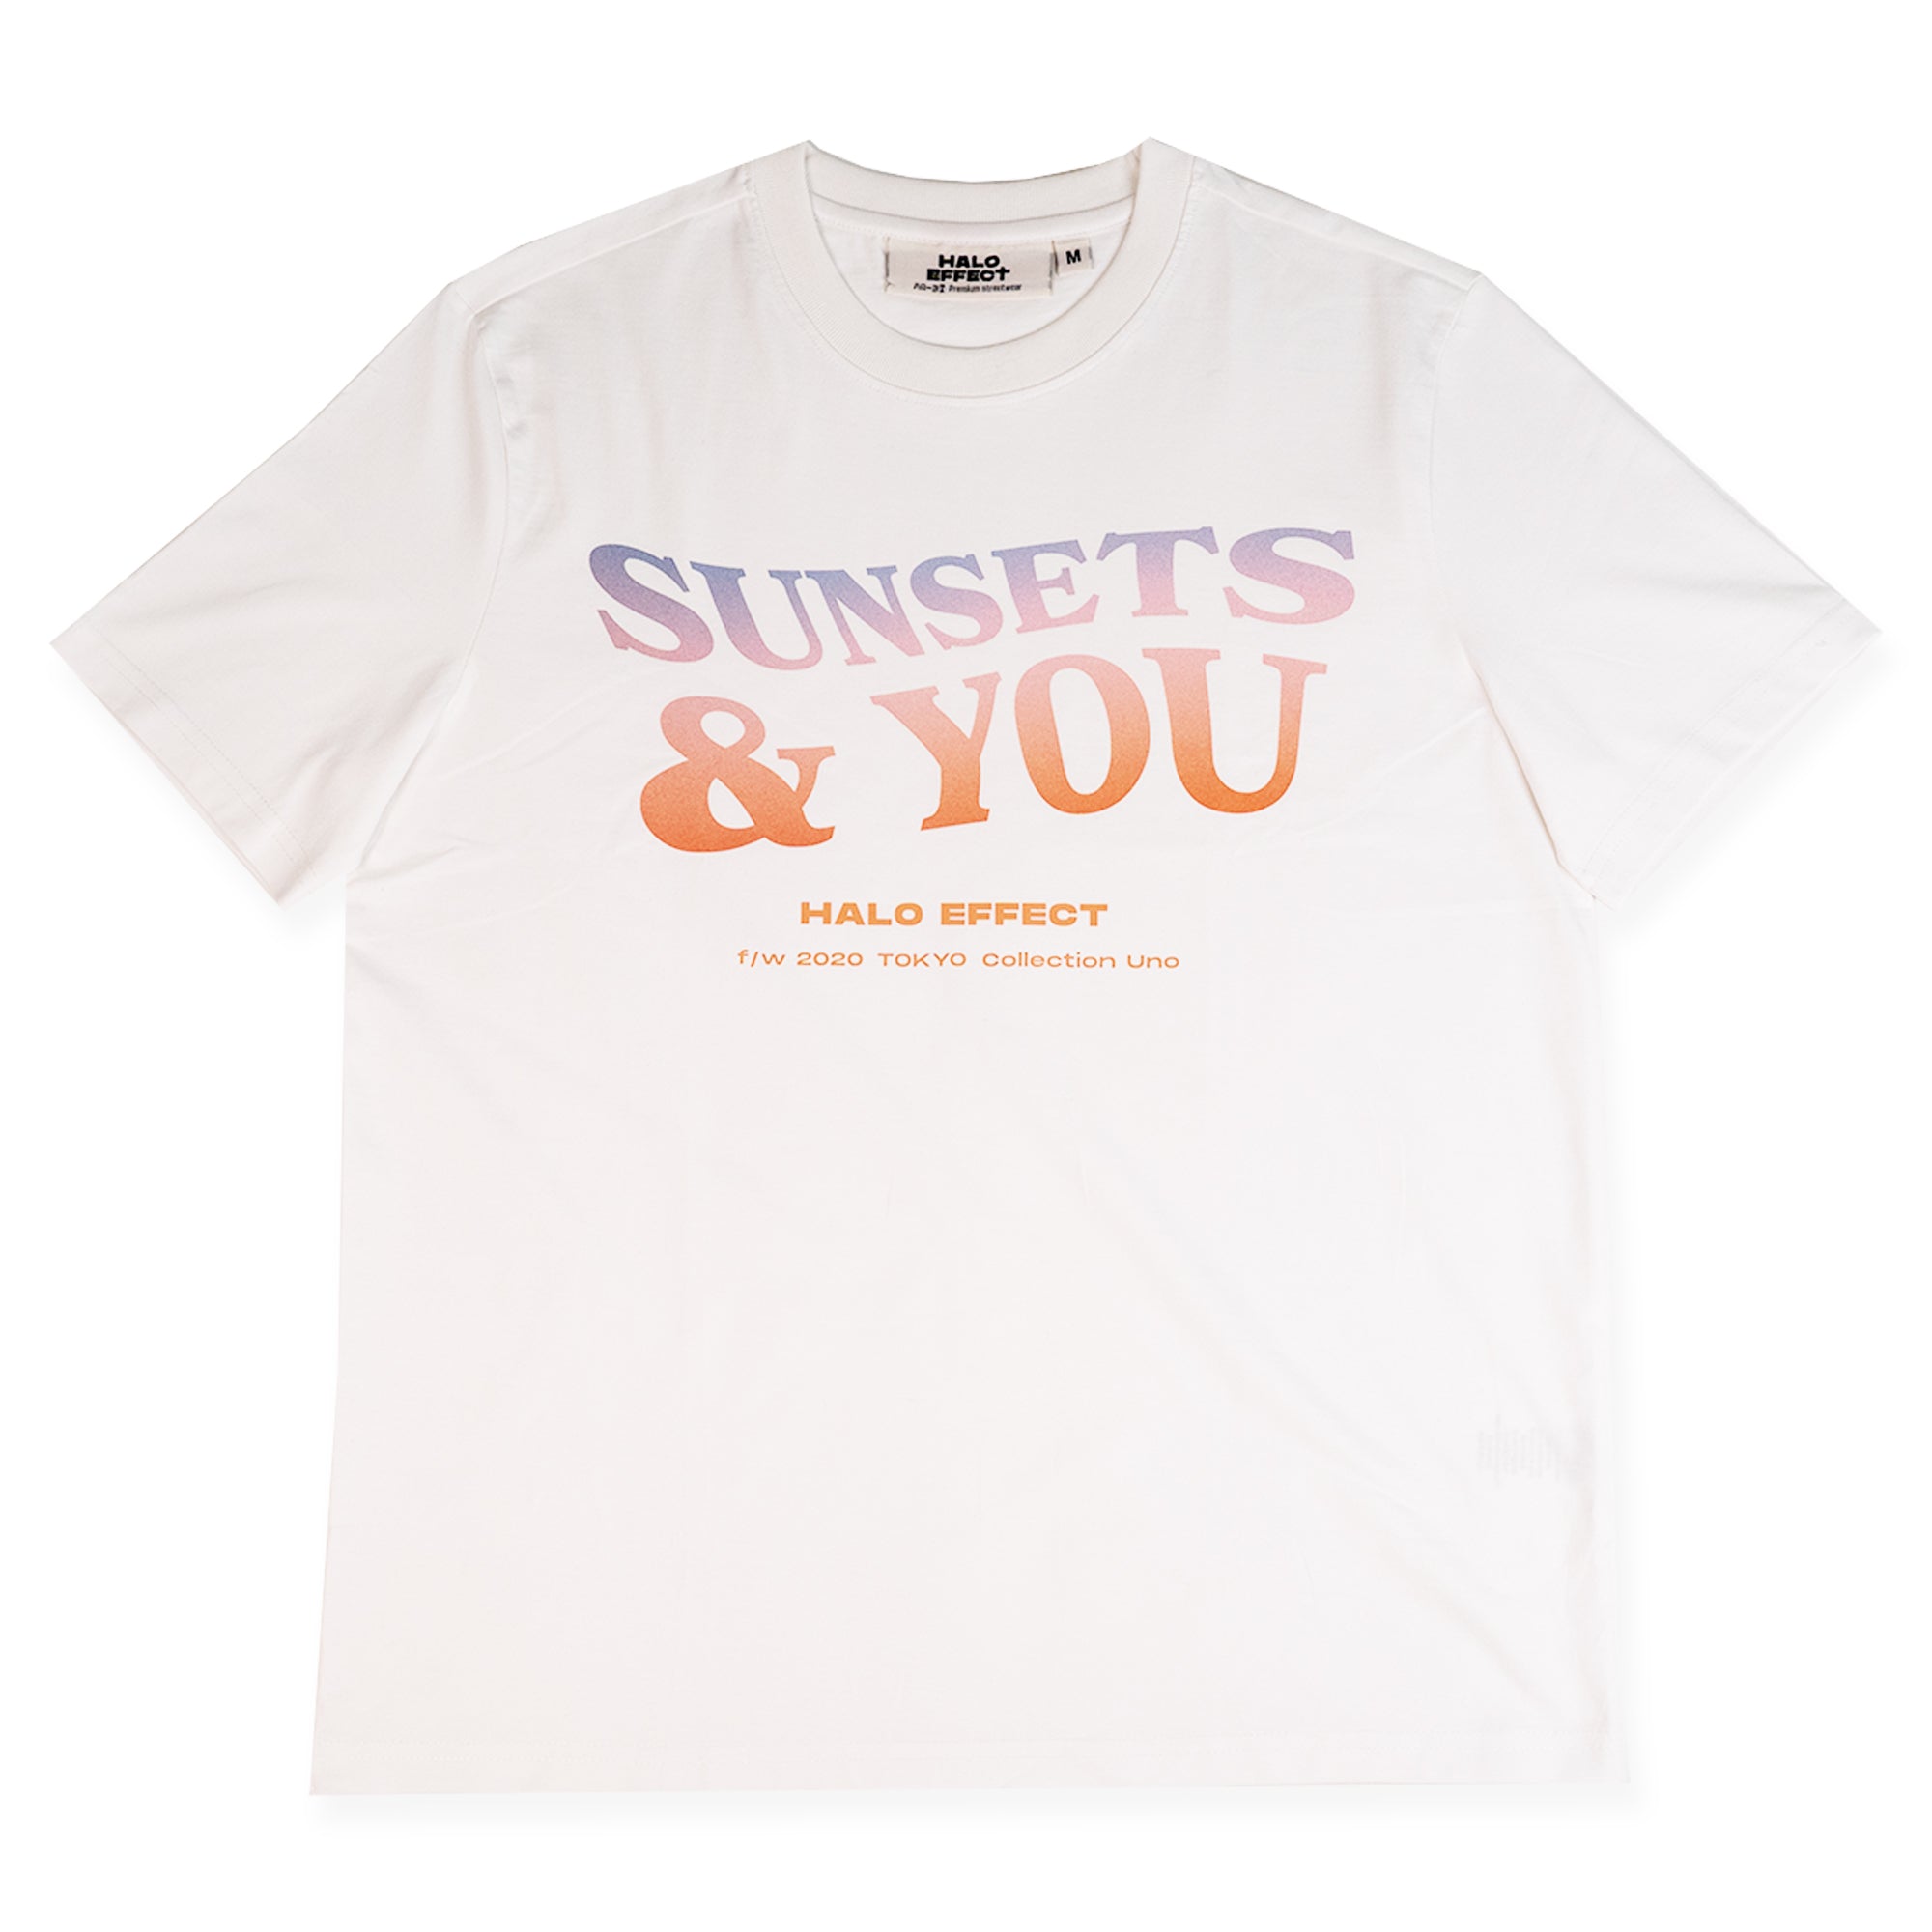 SUNSETS & YOU T-SHIRT (WHITE)